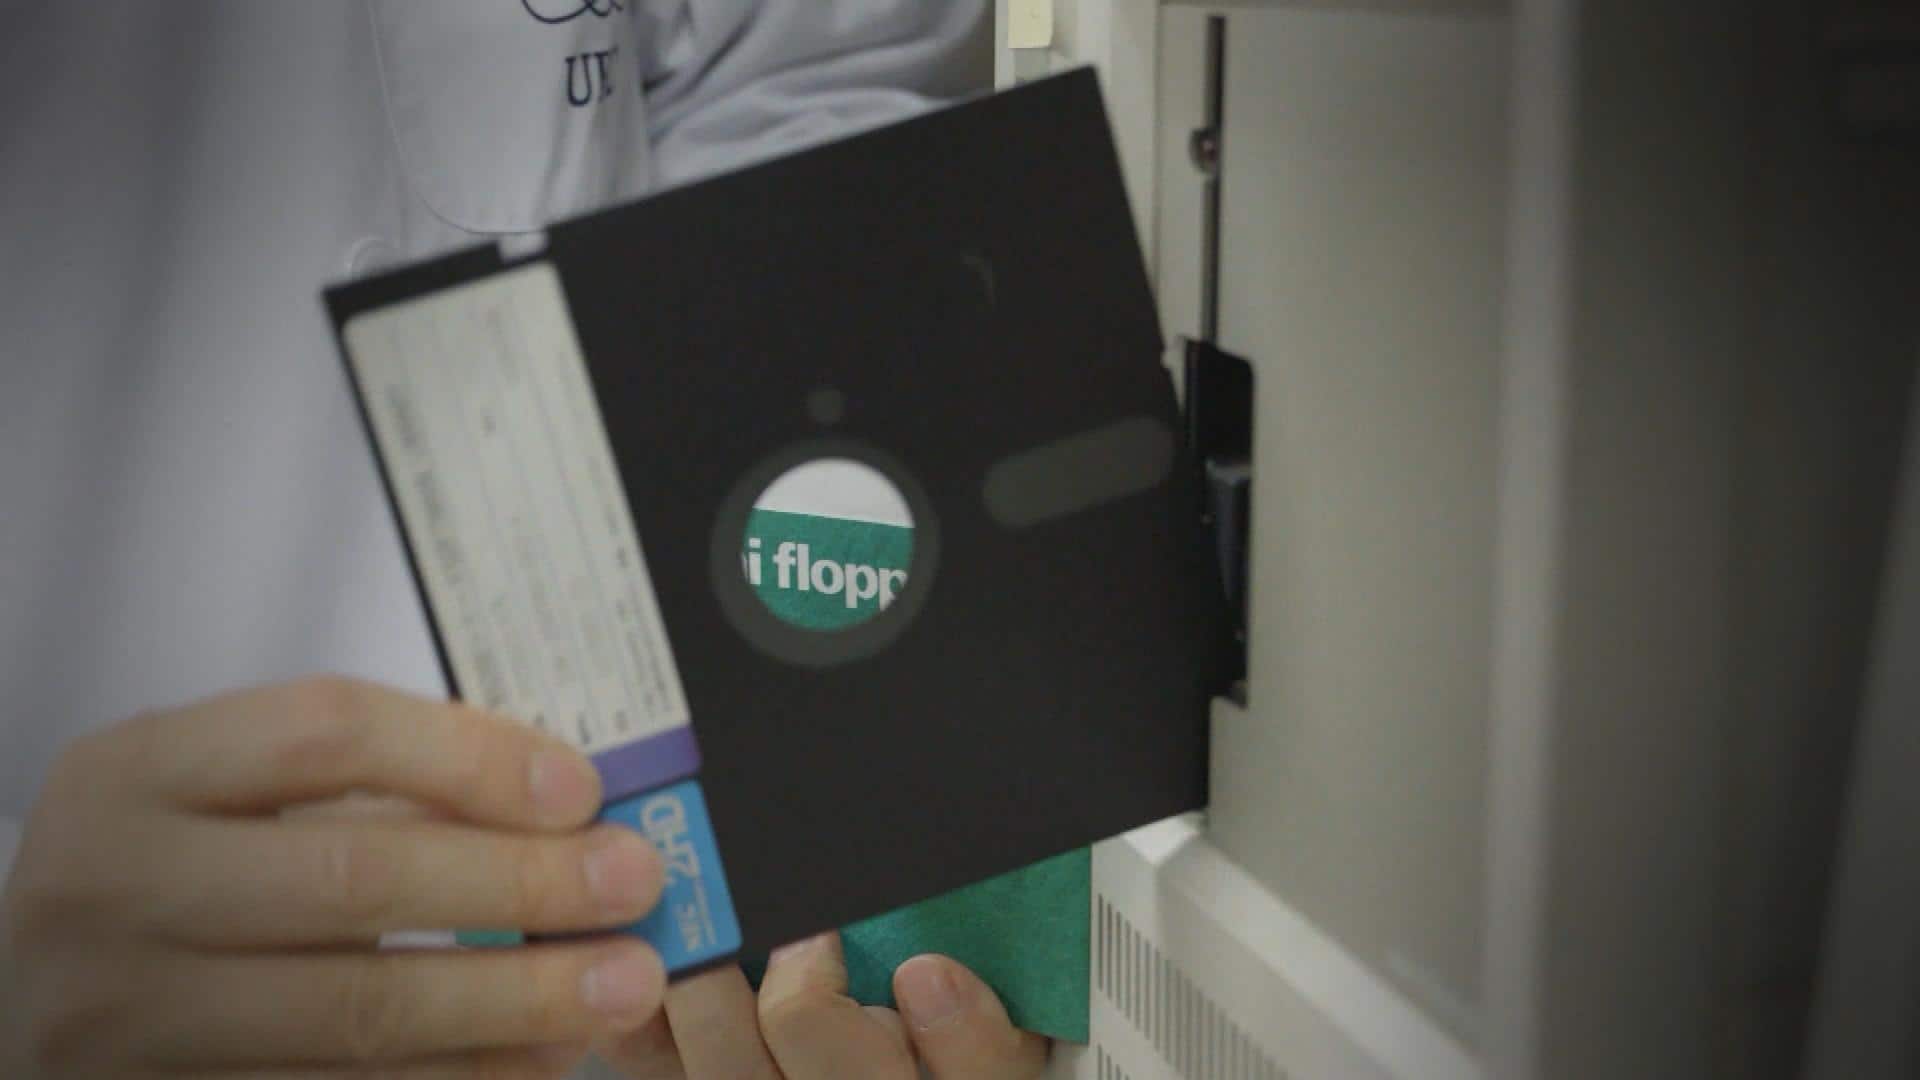 Japanese government phasing out floppy disks, but some users aren’t ready to say goodbye [Video]